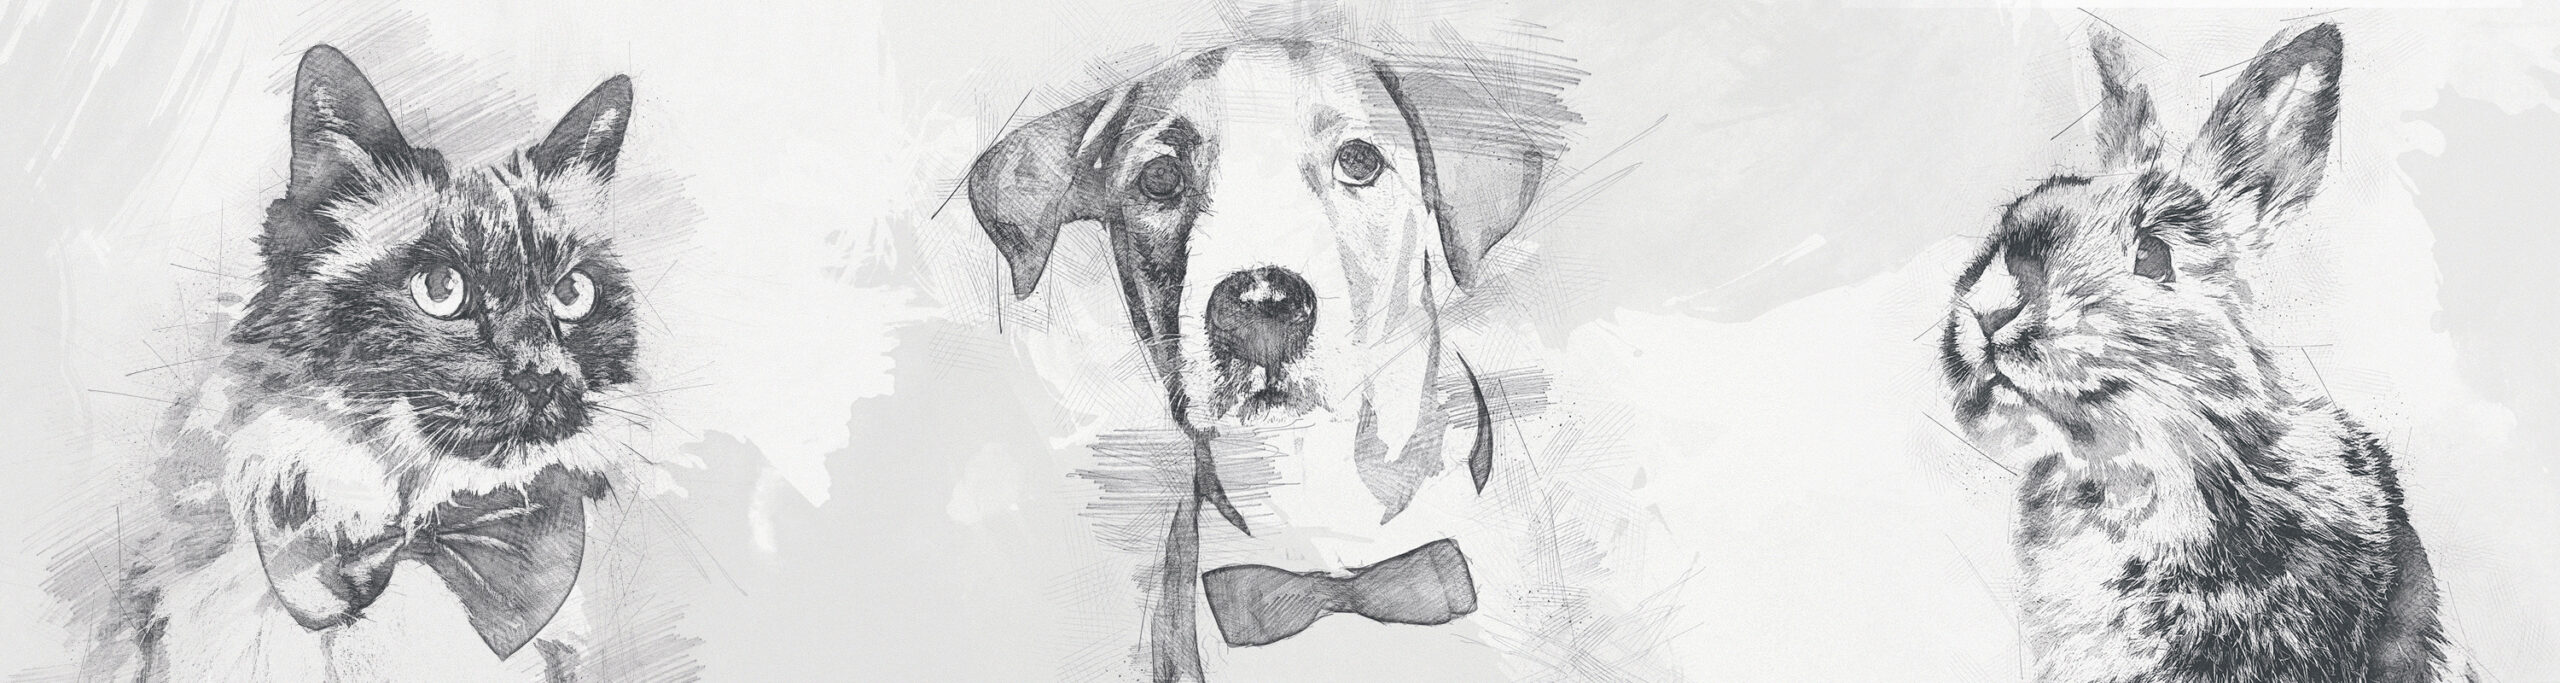 Humane Society of Tampa Bay - Have you reserved your seats for Tuxes and  Tails? We are excited for another amazing gala to benefit the animals in  our care. This year the